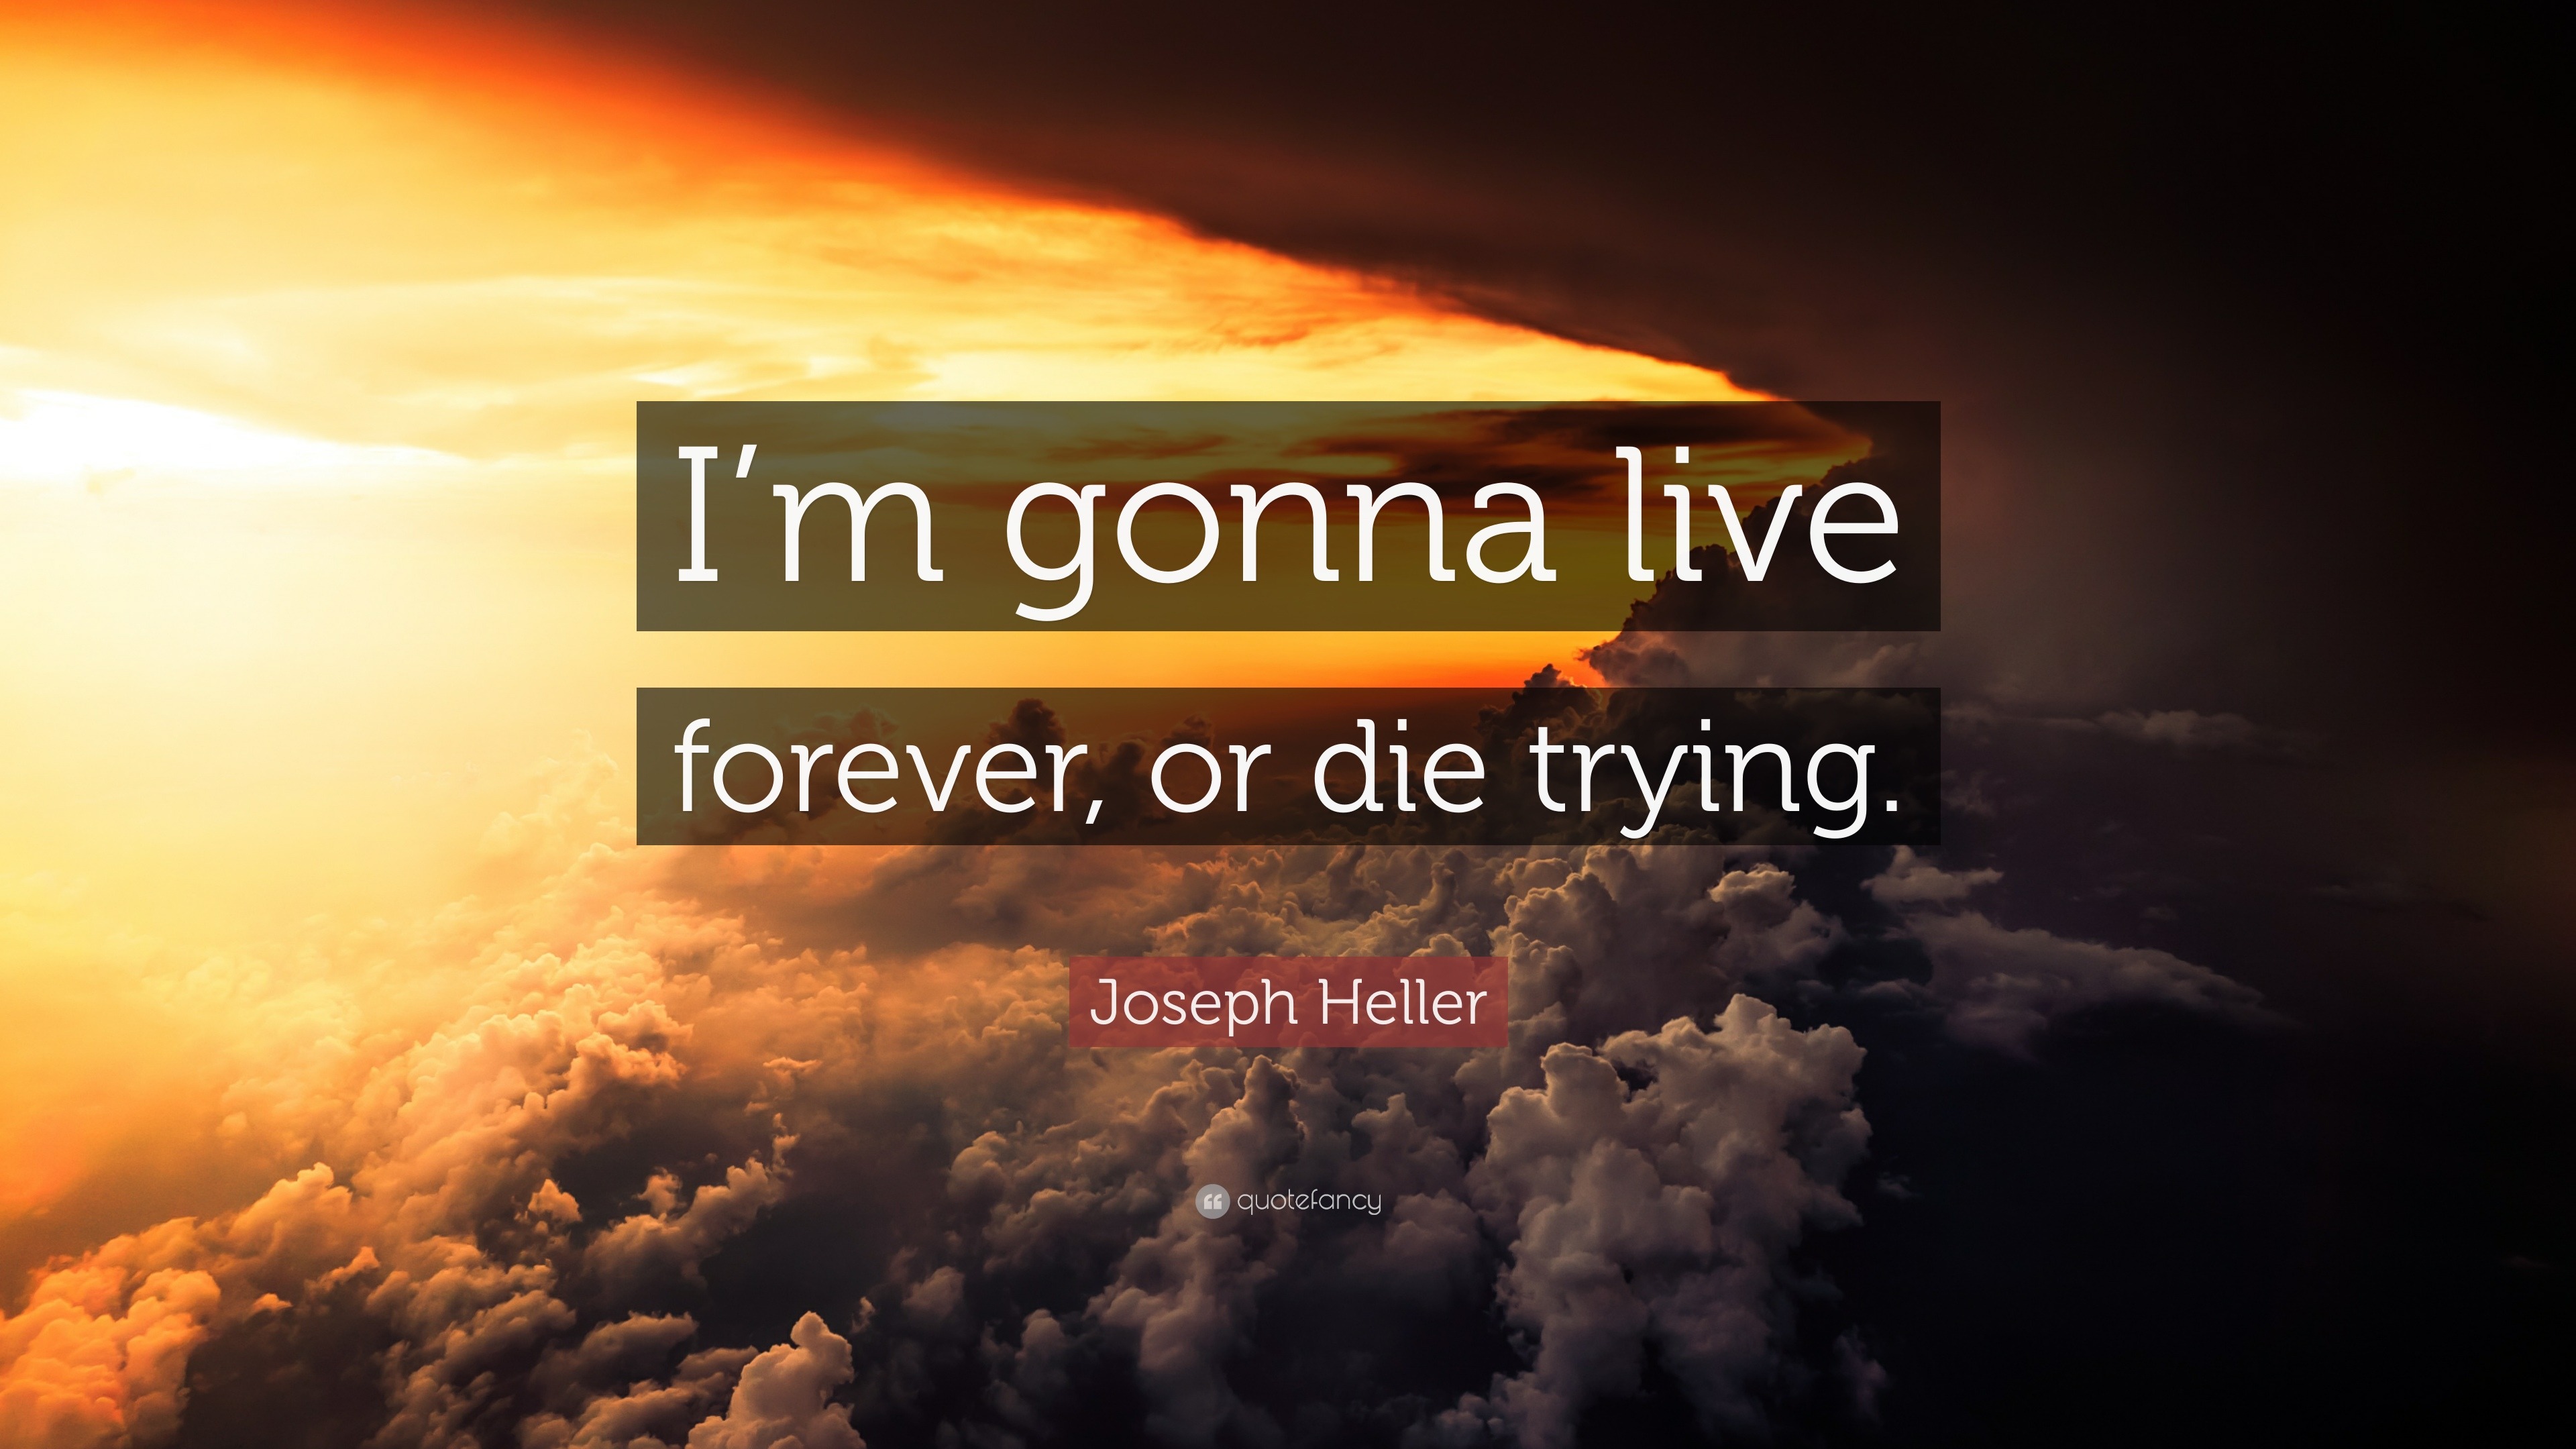 Joseph Heller Quote: "I'm gonna live forever, or die trying." (11 wallpapers) - Quotefancy